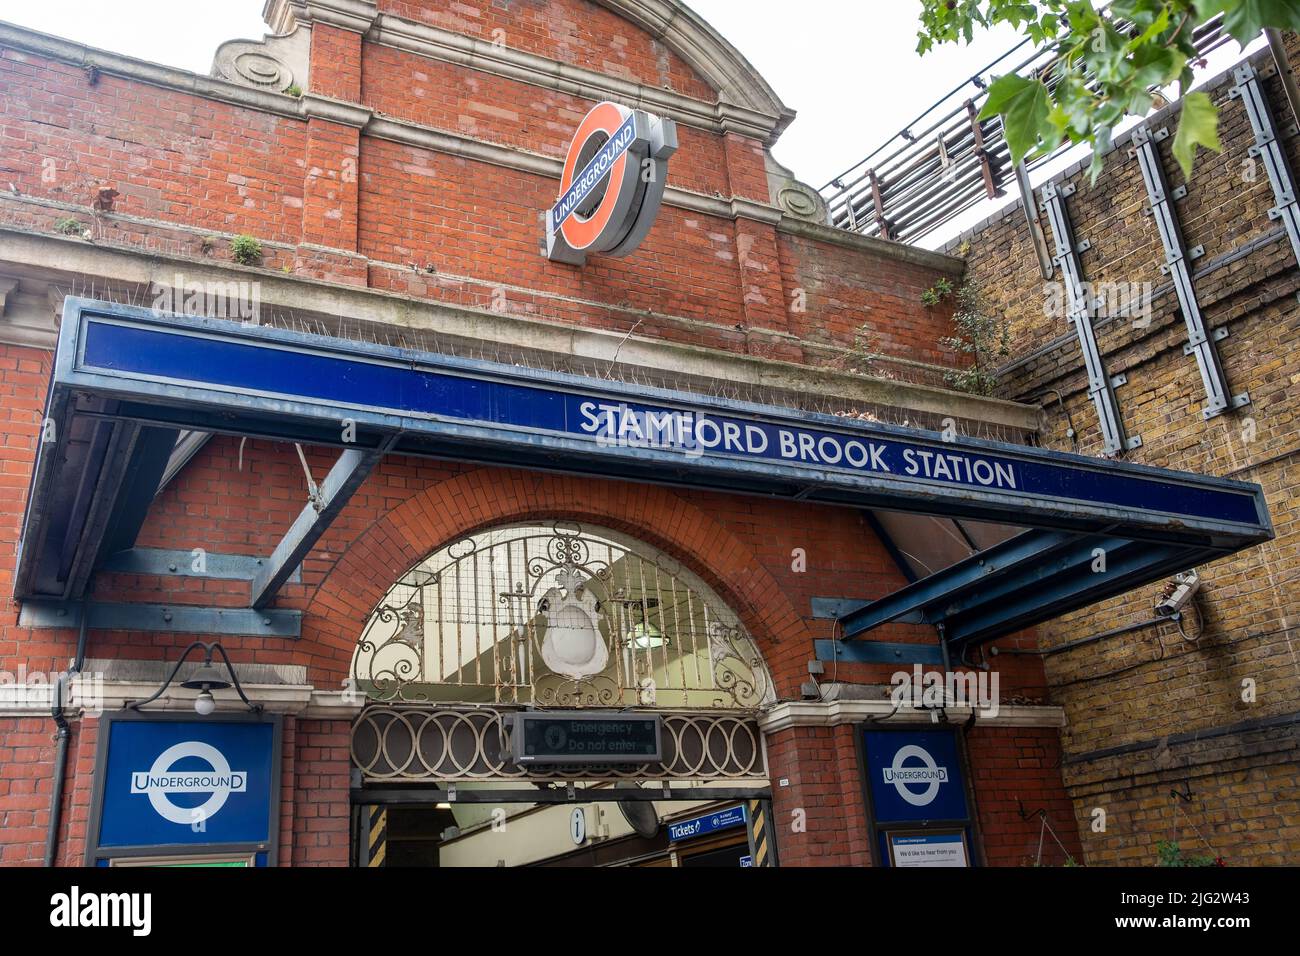 London, June 2022: Stamford Brook Station, a District Line Underground station in West London Stock Photo